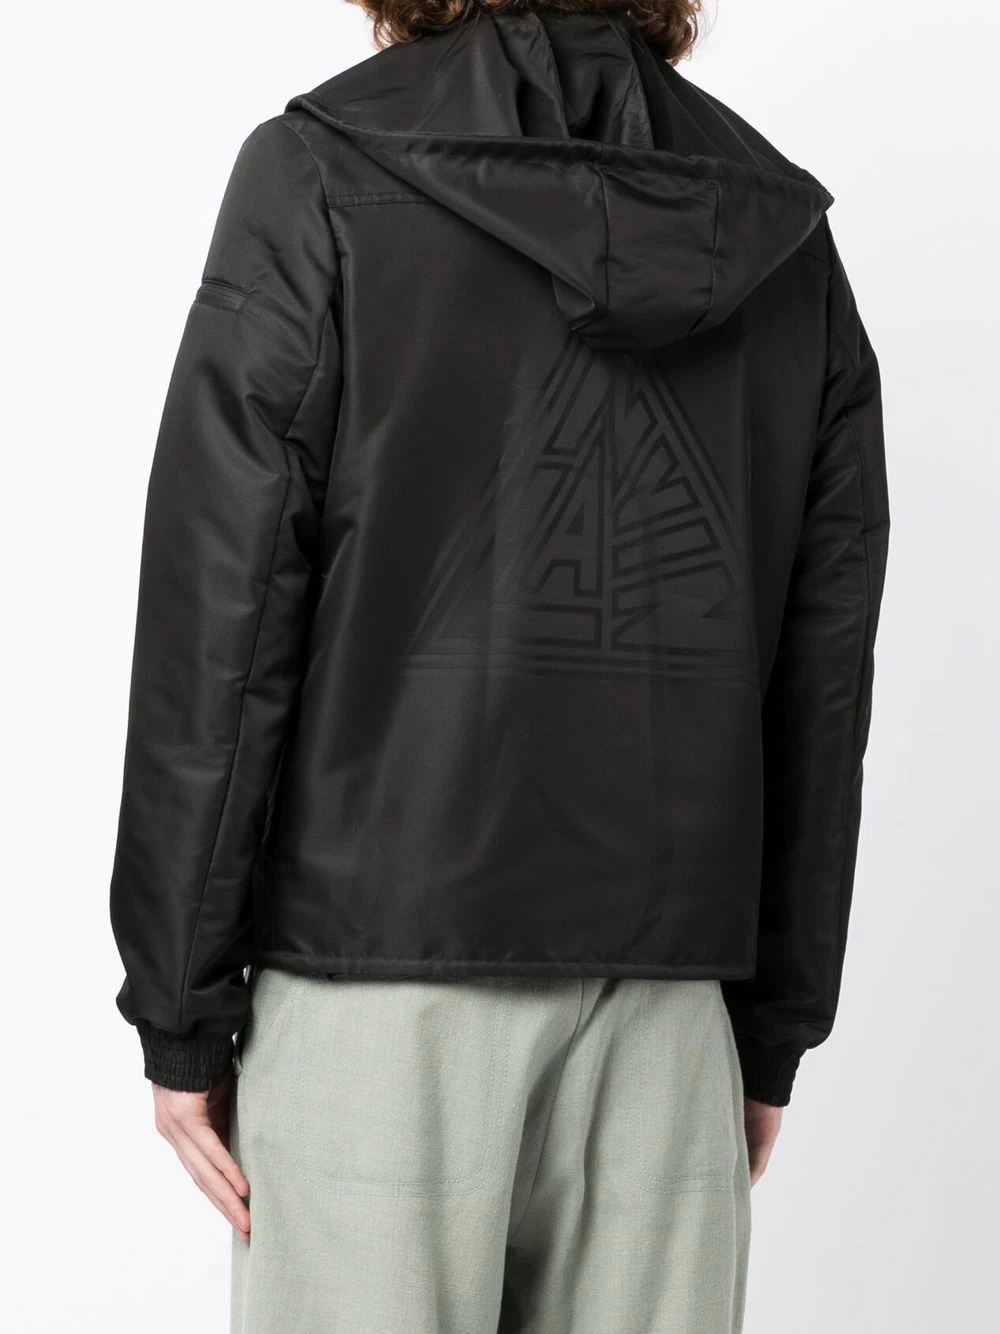 graphic-print hooded jacket - 4